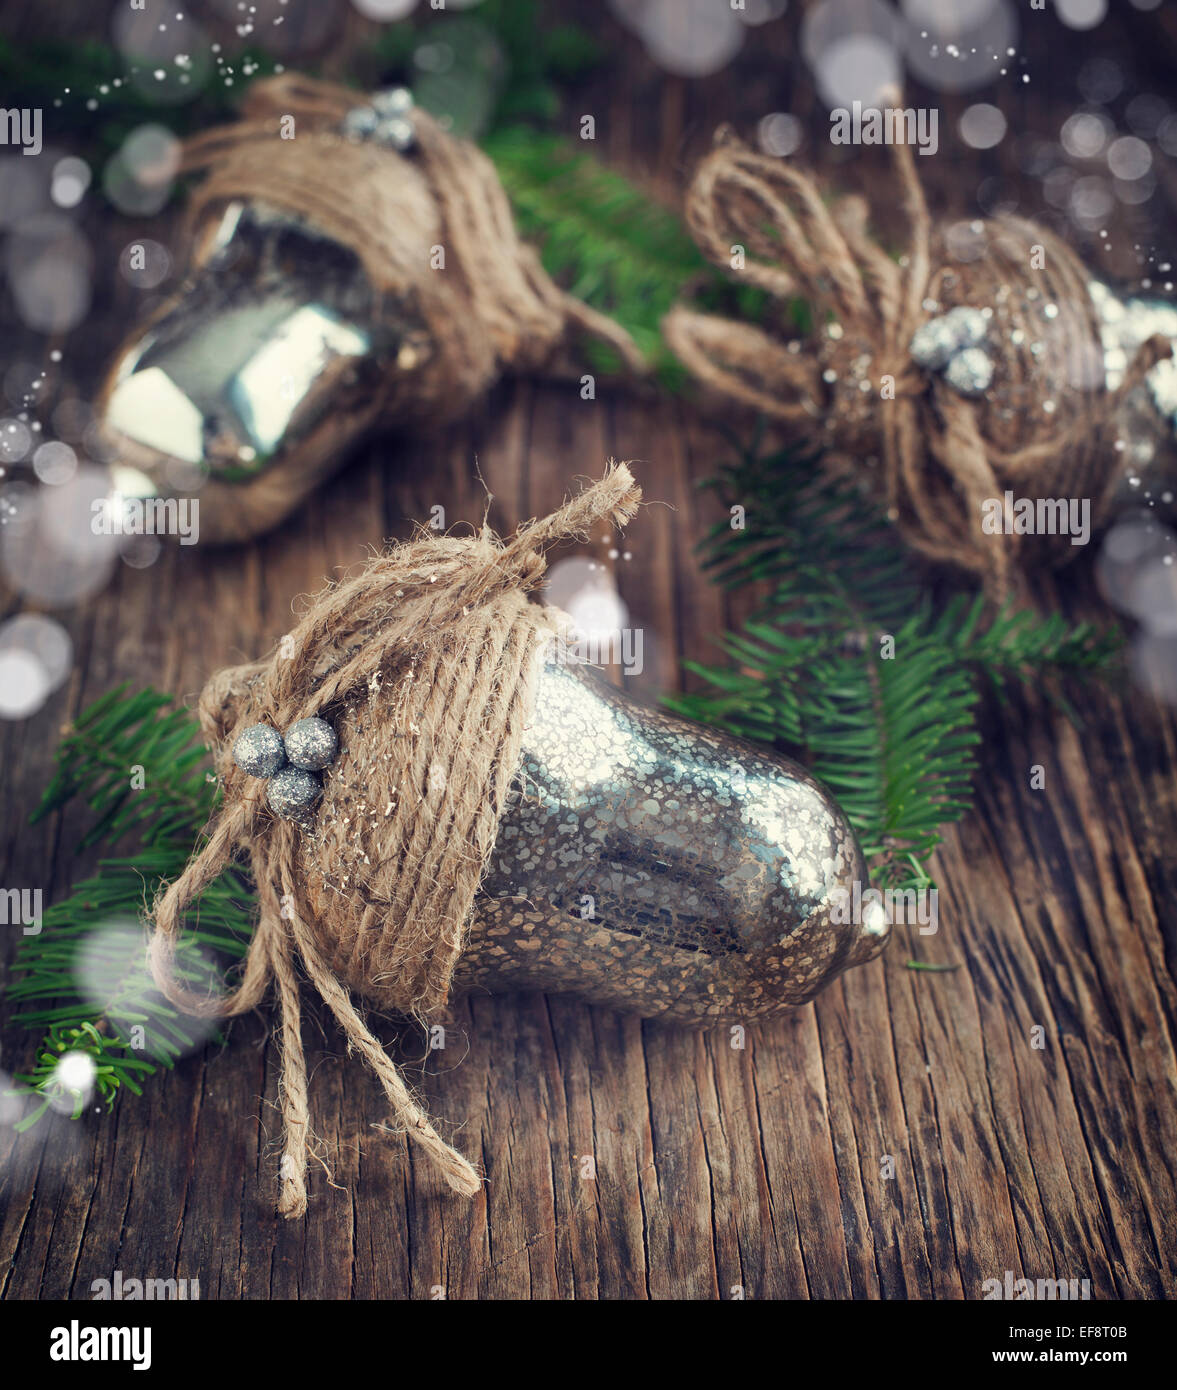 Silver-colored Christmas baubles on wooden surface Stock Photo